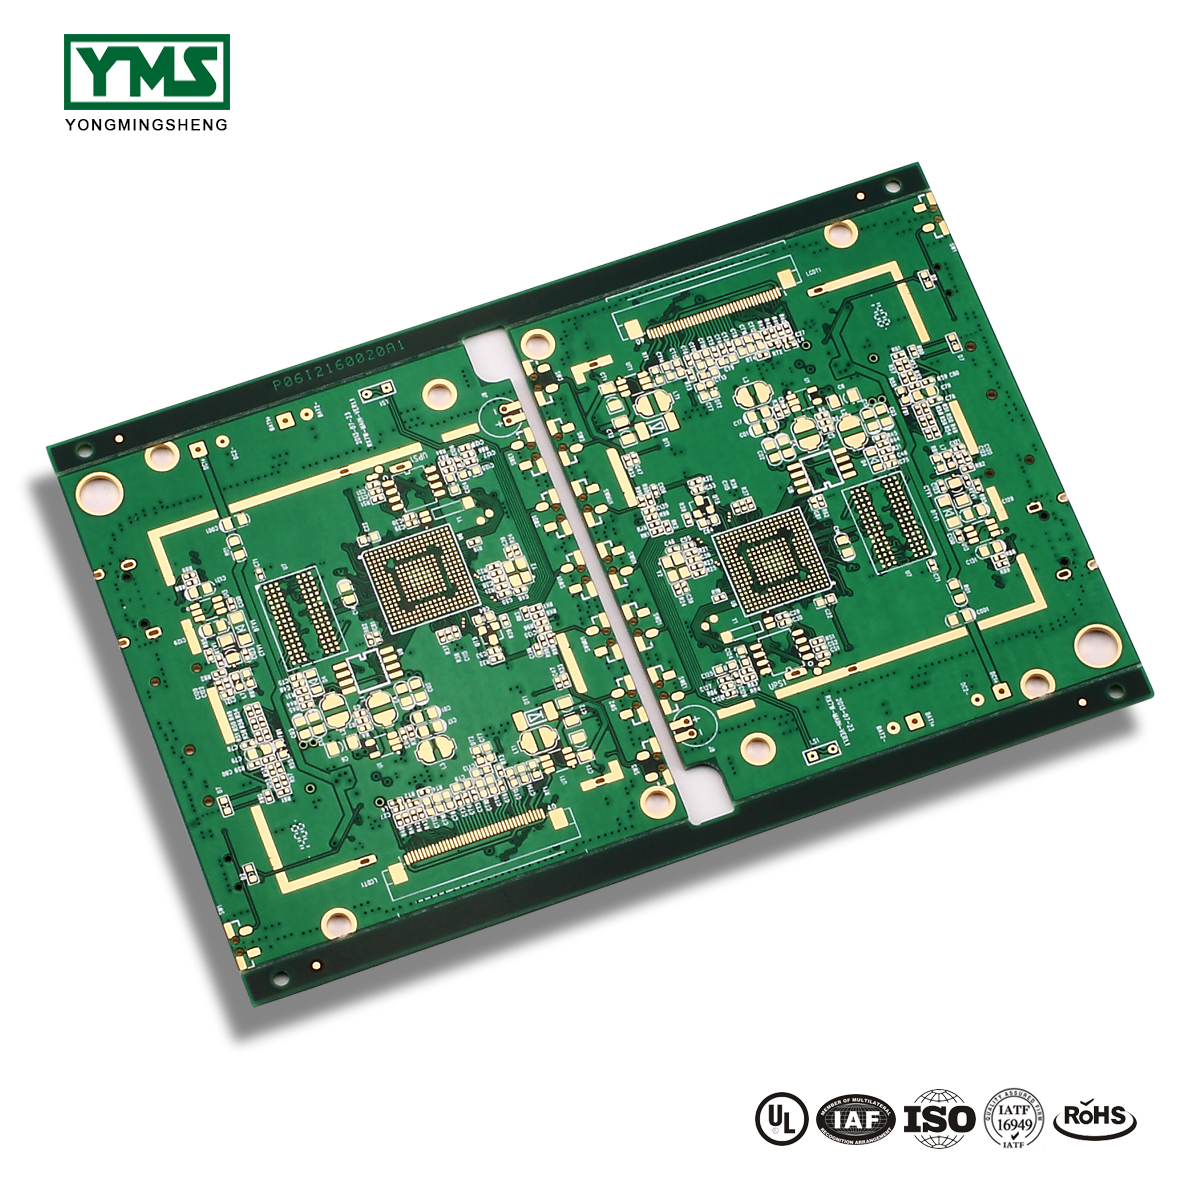 Special Design for Thermoelectric Copper Base Pcb - 6 Layer High Tg Board | YMS PCB – Yongmingsheng